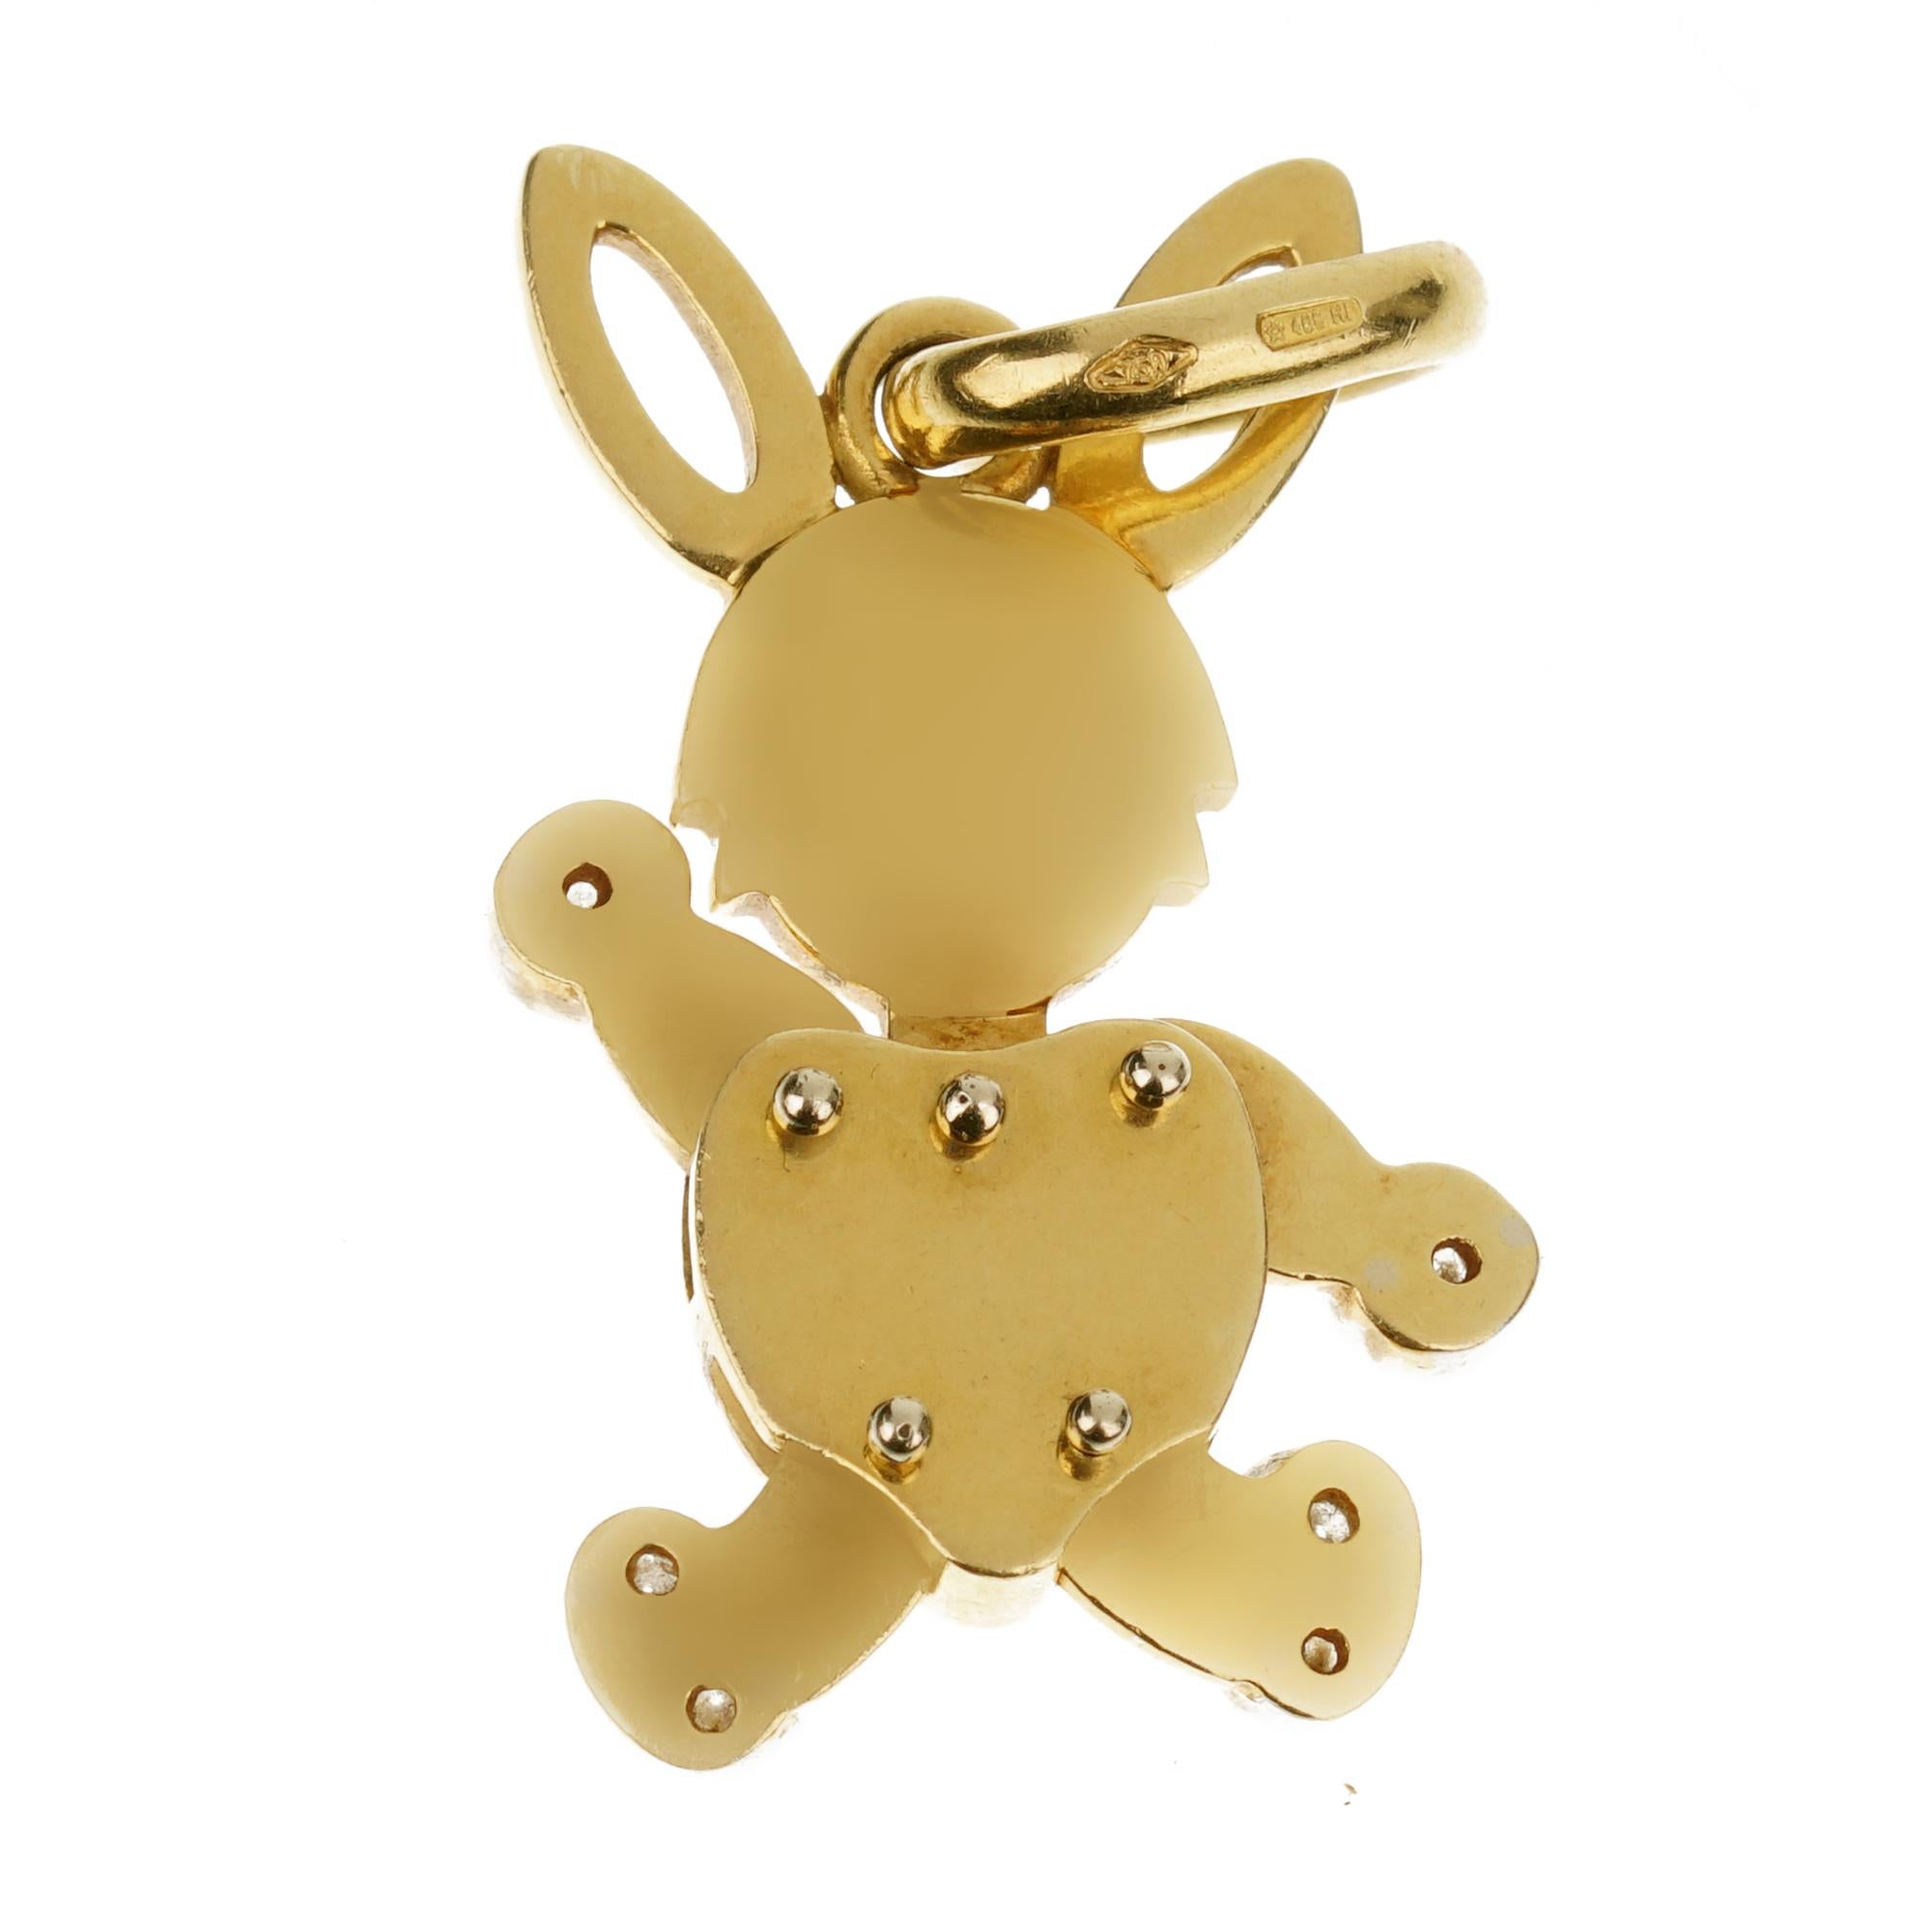 This exquisite Pomellato Vintage Bunny Charm Pendant is a mesmerizing piece that exudes both charm and luxury. Crafted with meticulous attention to detail, this pendant showcases the brand's renowned craftsmanship and innovative design. The pendant